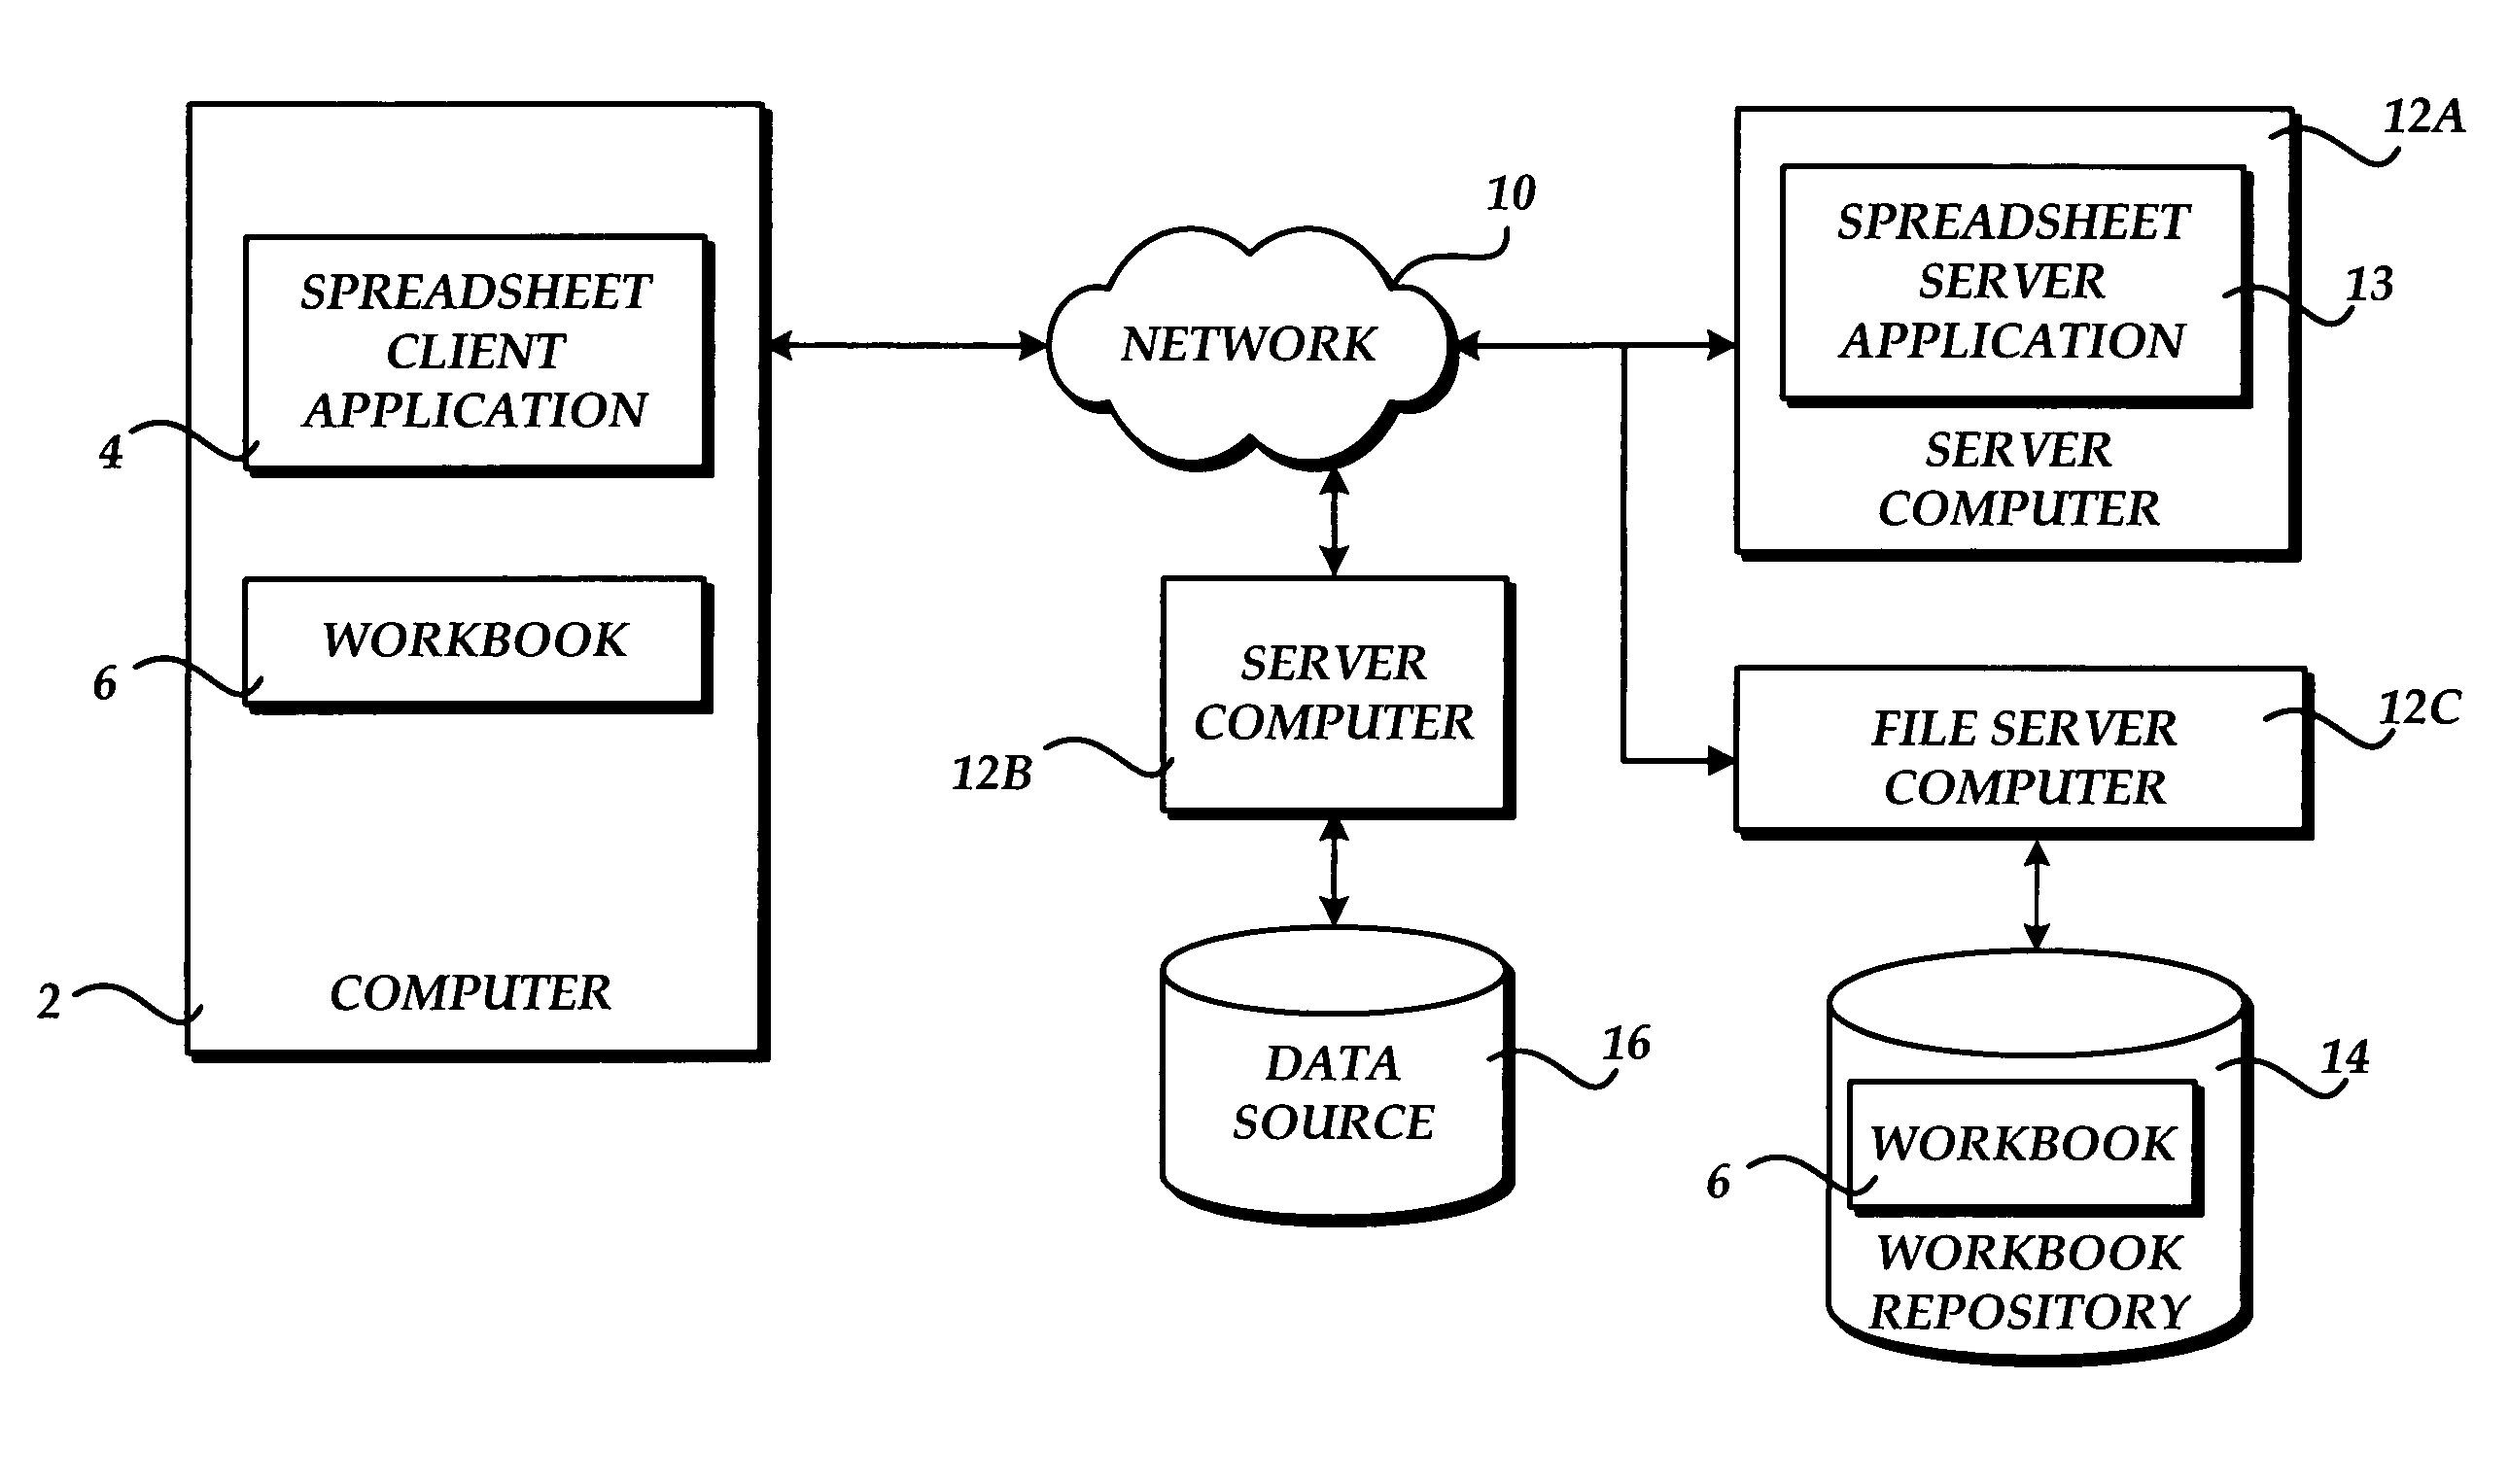 Load balancing based on cache content